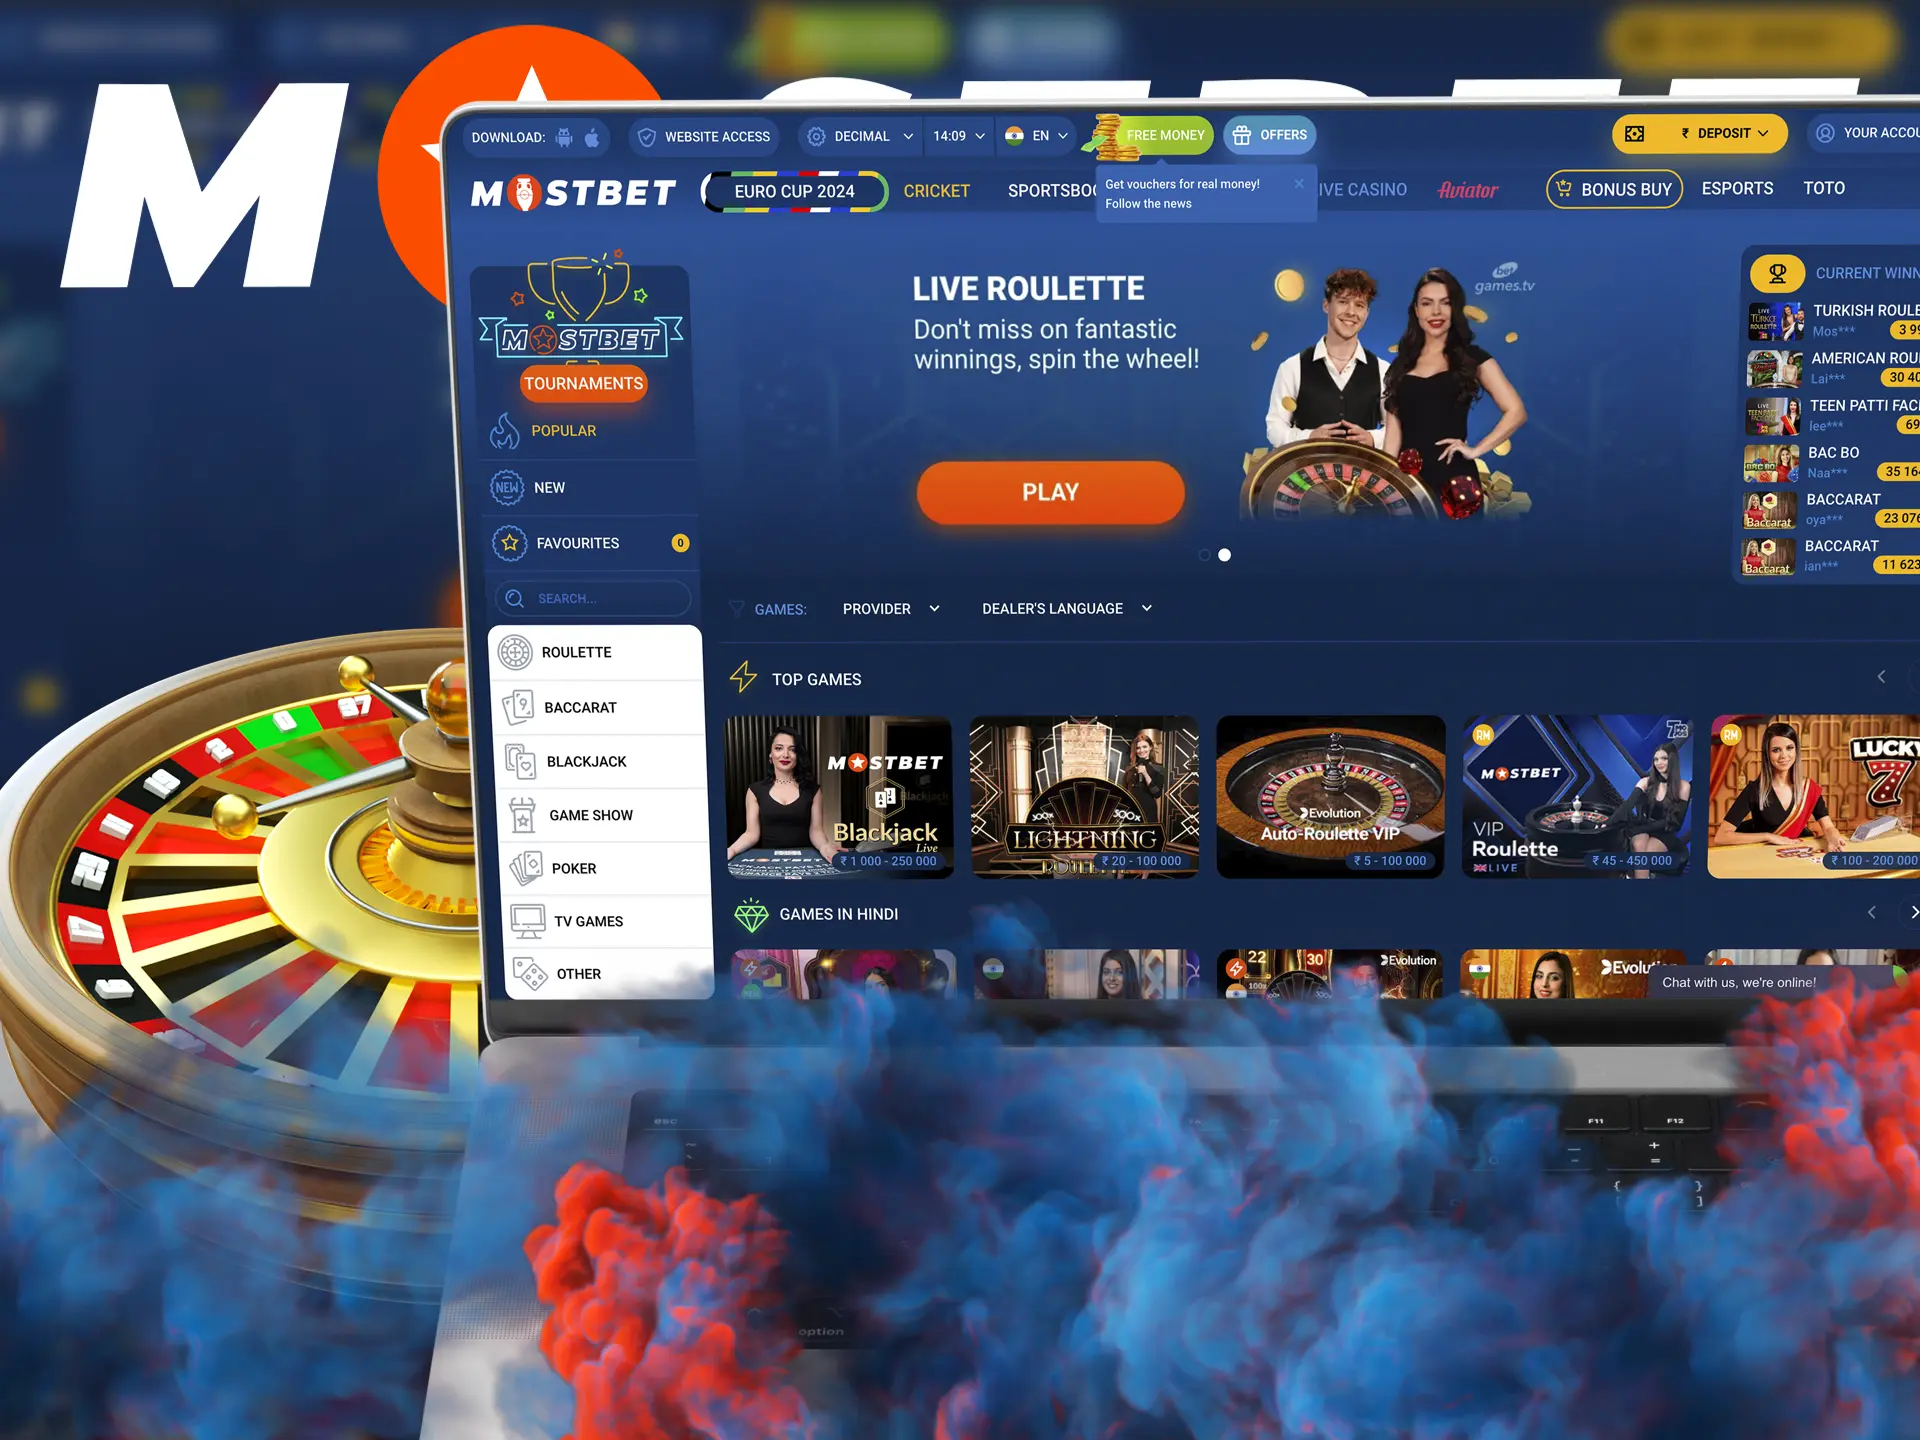 At Mostbet you will find the best roulette with big winnings.